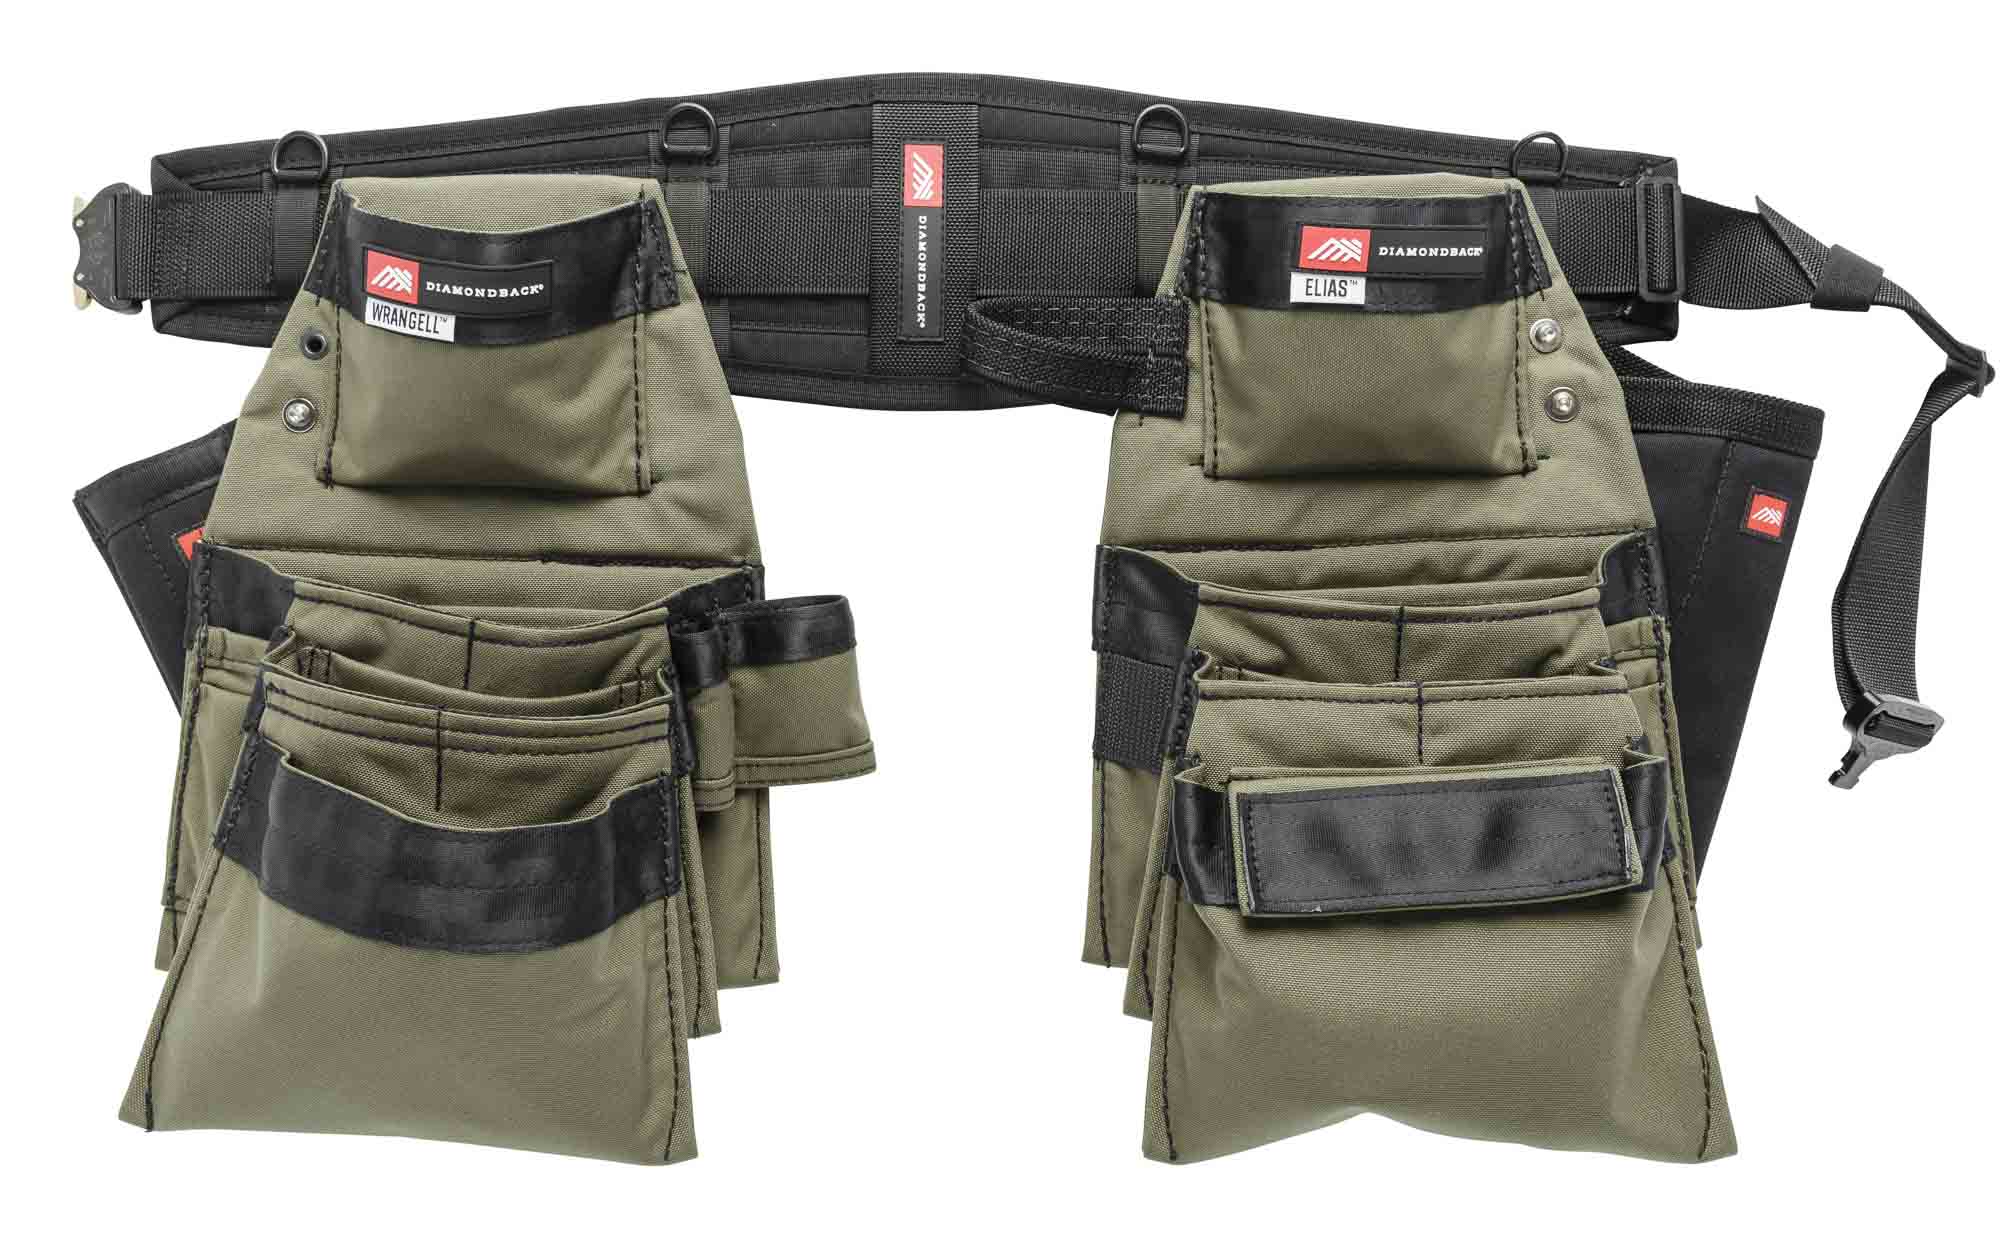 Pro Framer Tool Belt Set with Double Outer Bag - Small, Green